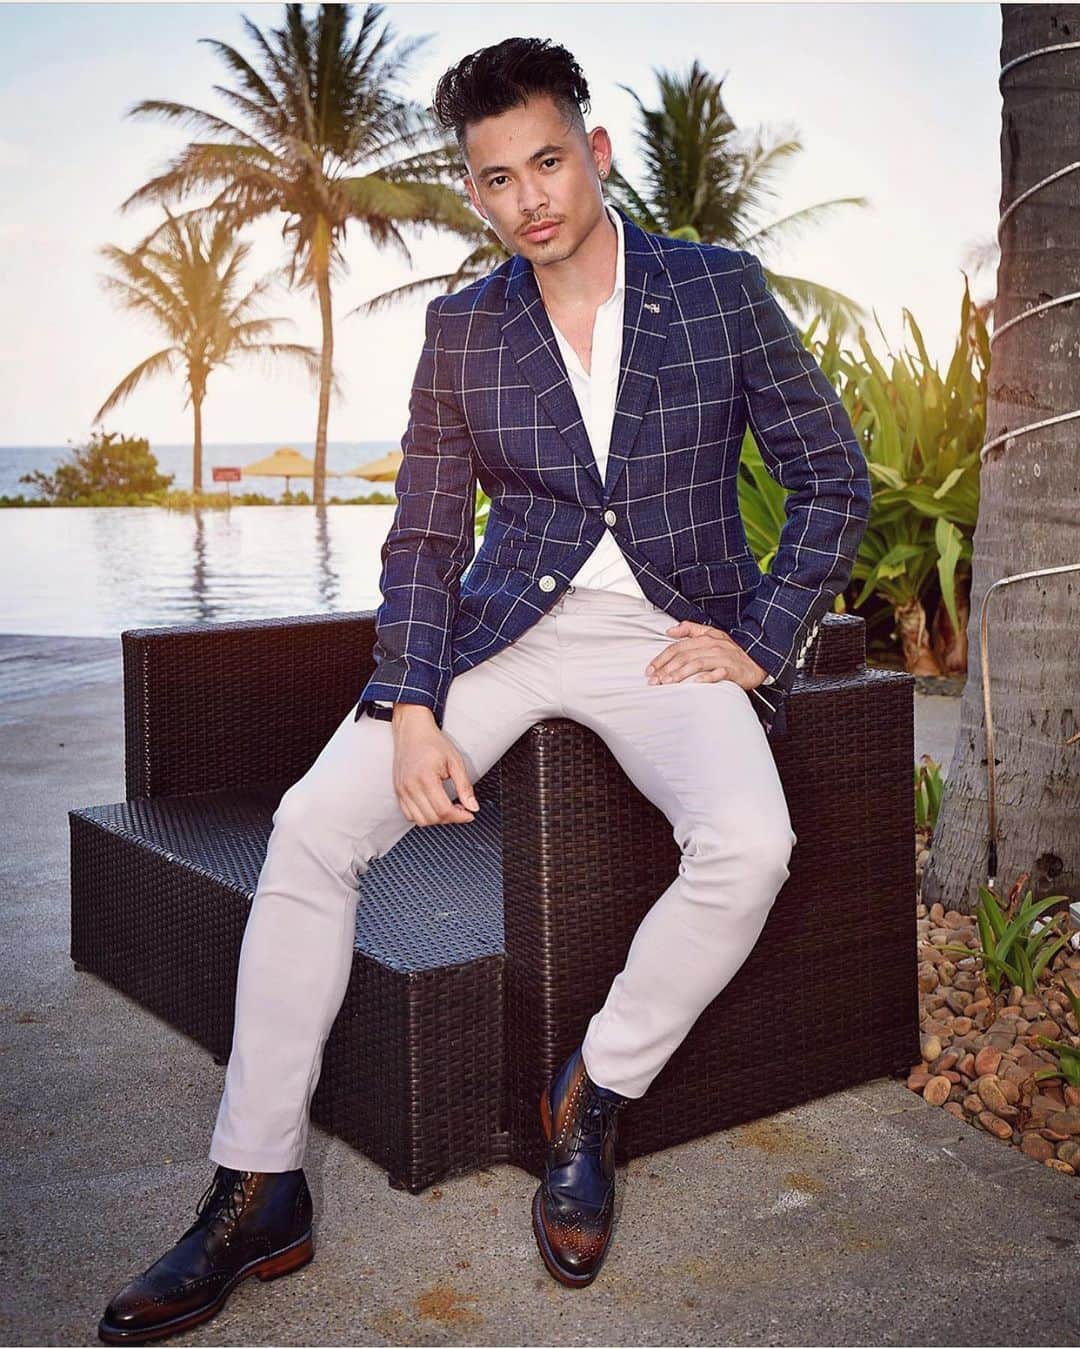 STYLE4GUYSのインスタグラム：「Outfit by @StylebyTommy 💥 #StylebyTommy. Check out his Latest Trends @StylebyTommy 💫 / Hairstyles @byTommyStyle ✂️.  _ Blazer @CavaniMenswear . Dress Shoes @JmlegazelUS  _ Be sure Follow & Tag us on your photos @Style4Guys / @MenStreetPost ! For your chance to be feature HERE!」